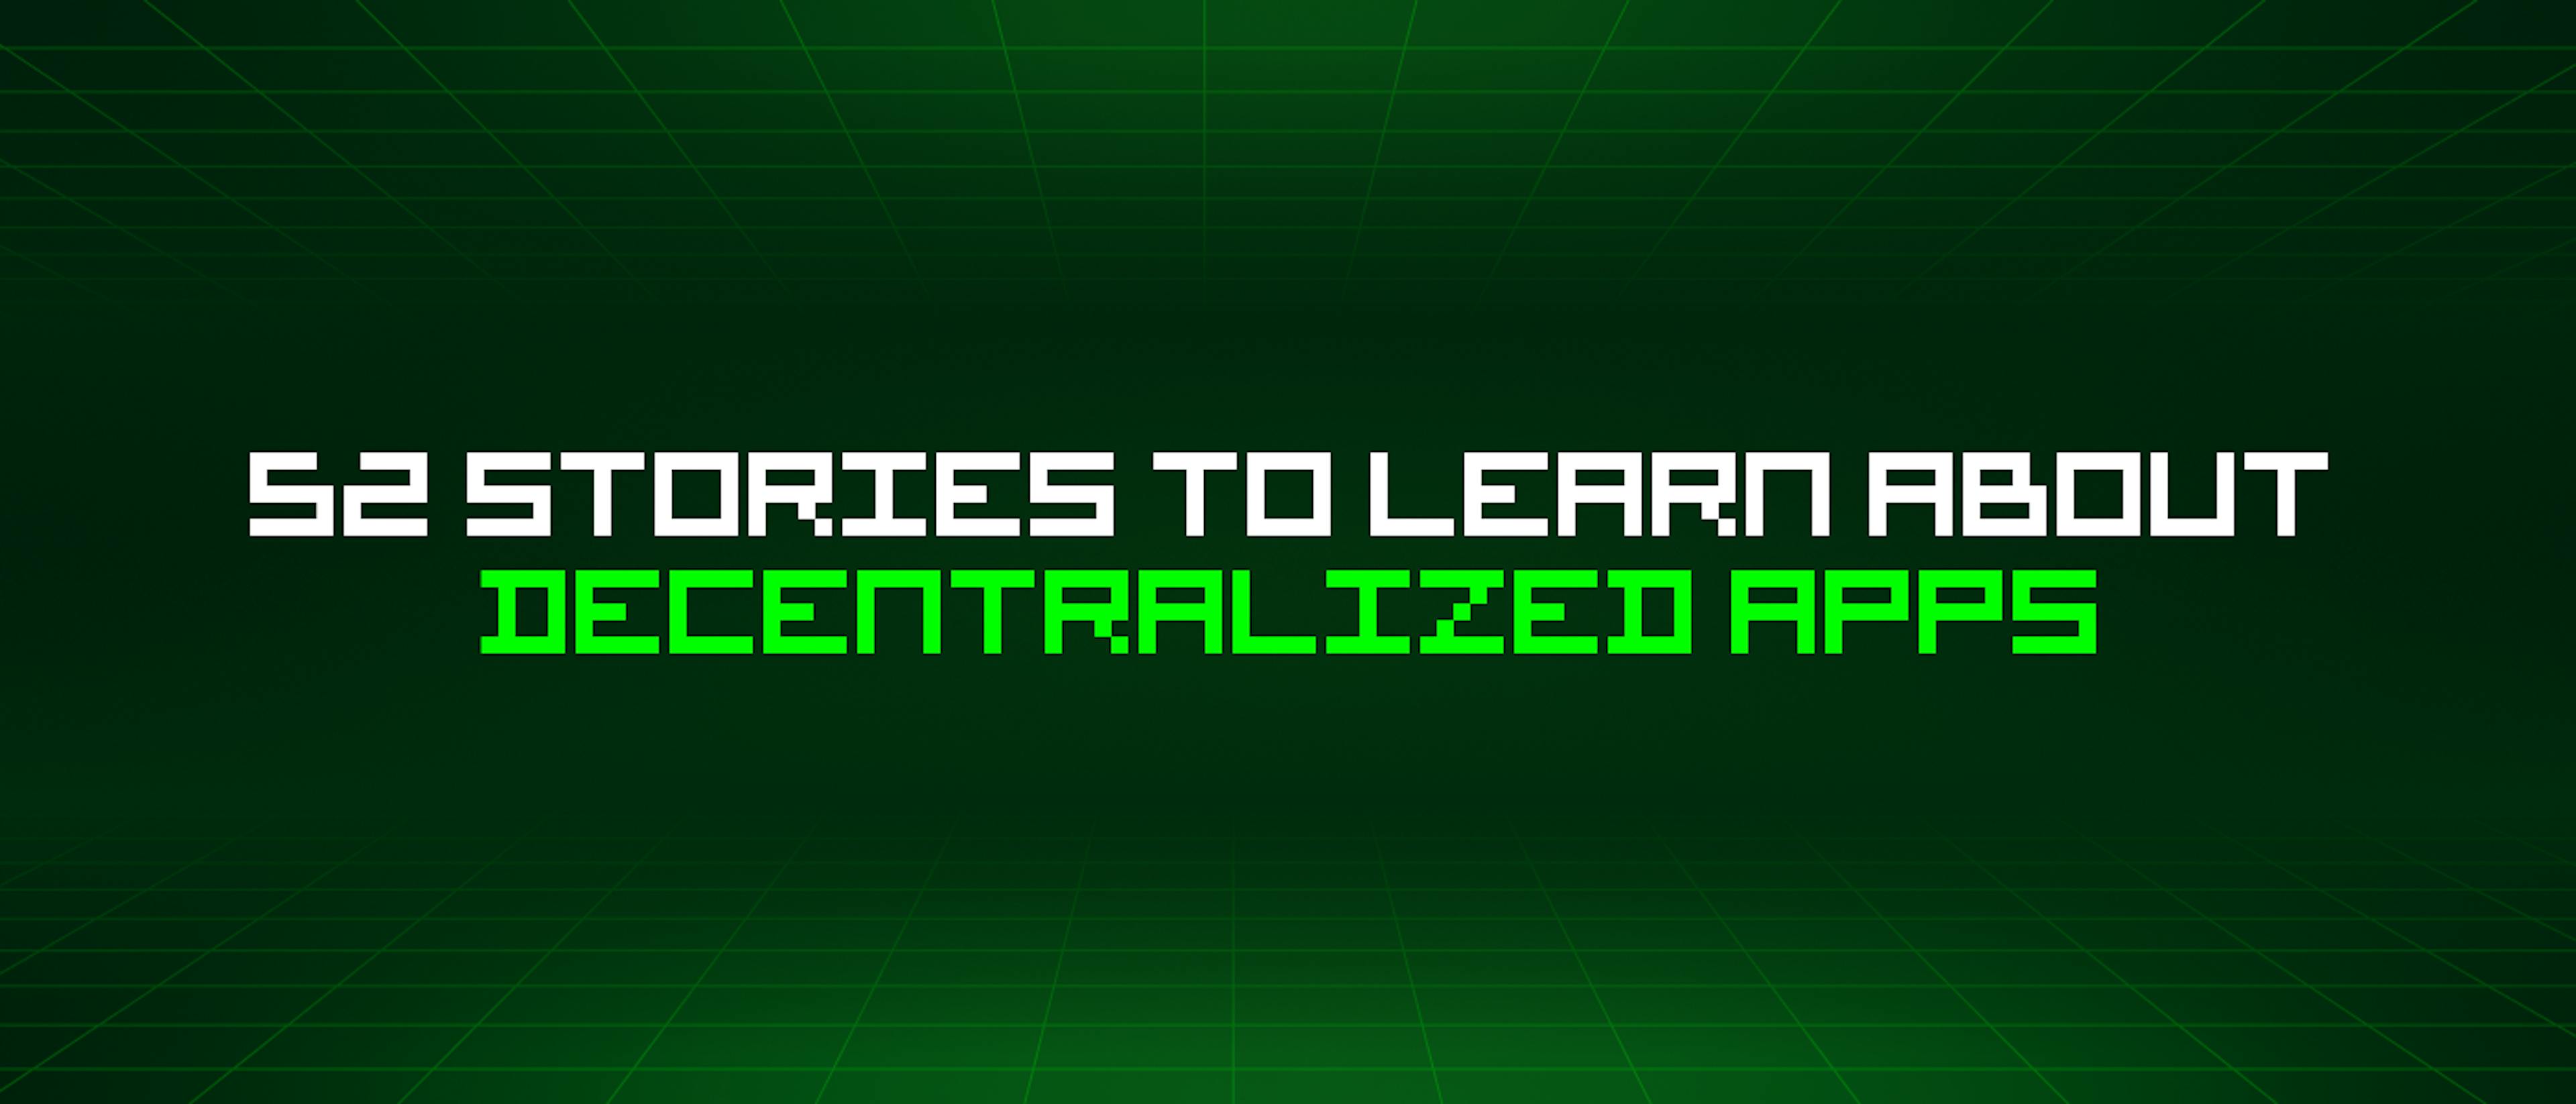 featured image - 52 Stories To Learn About Decentralized Apps